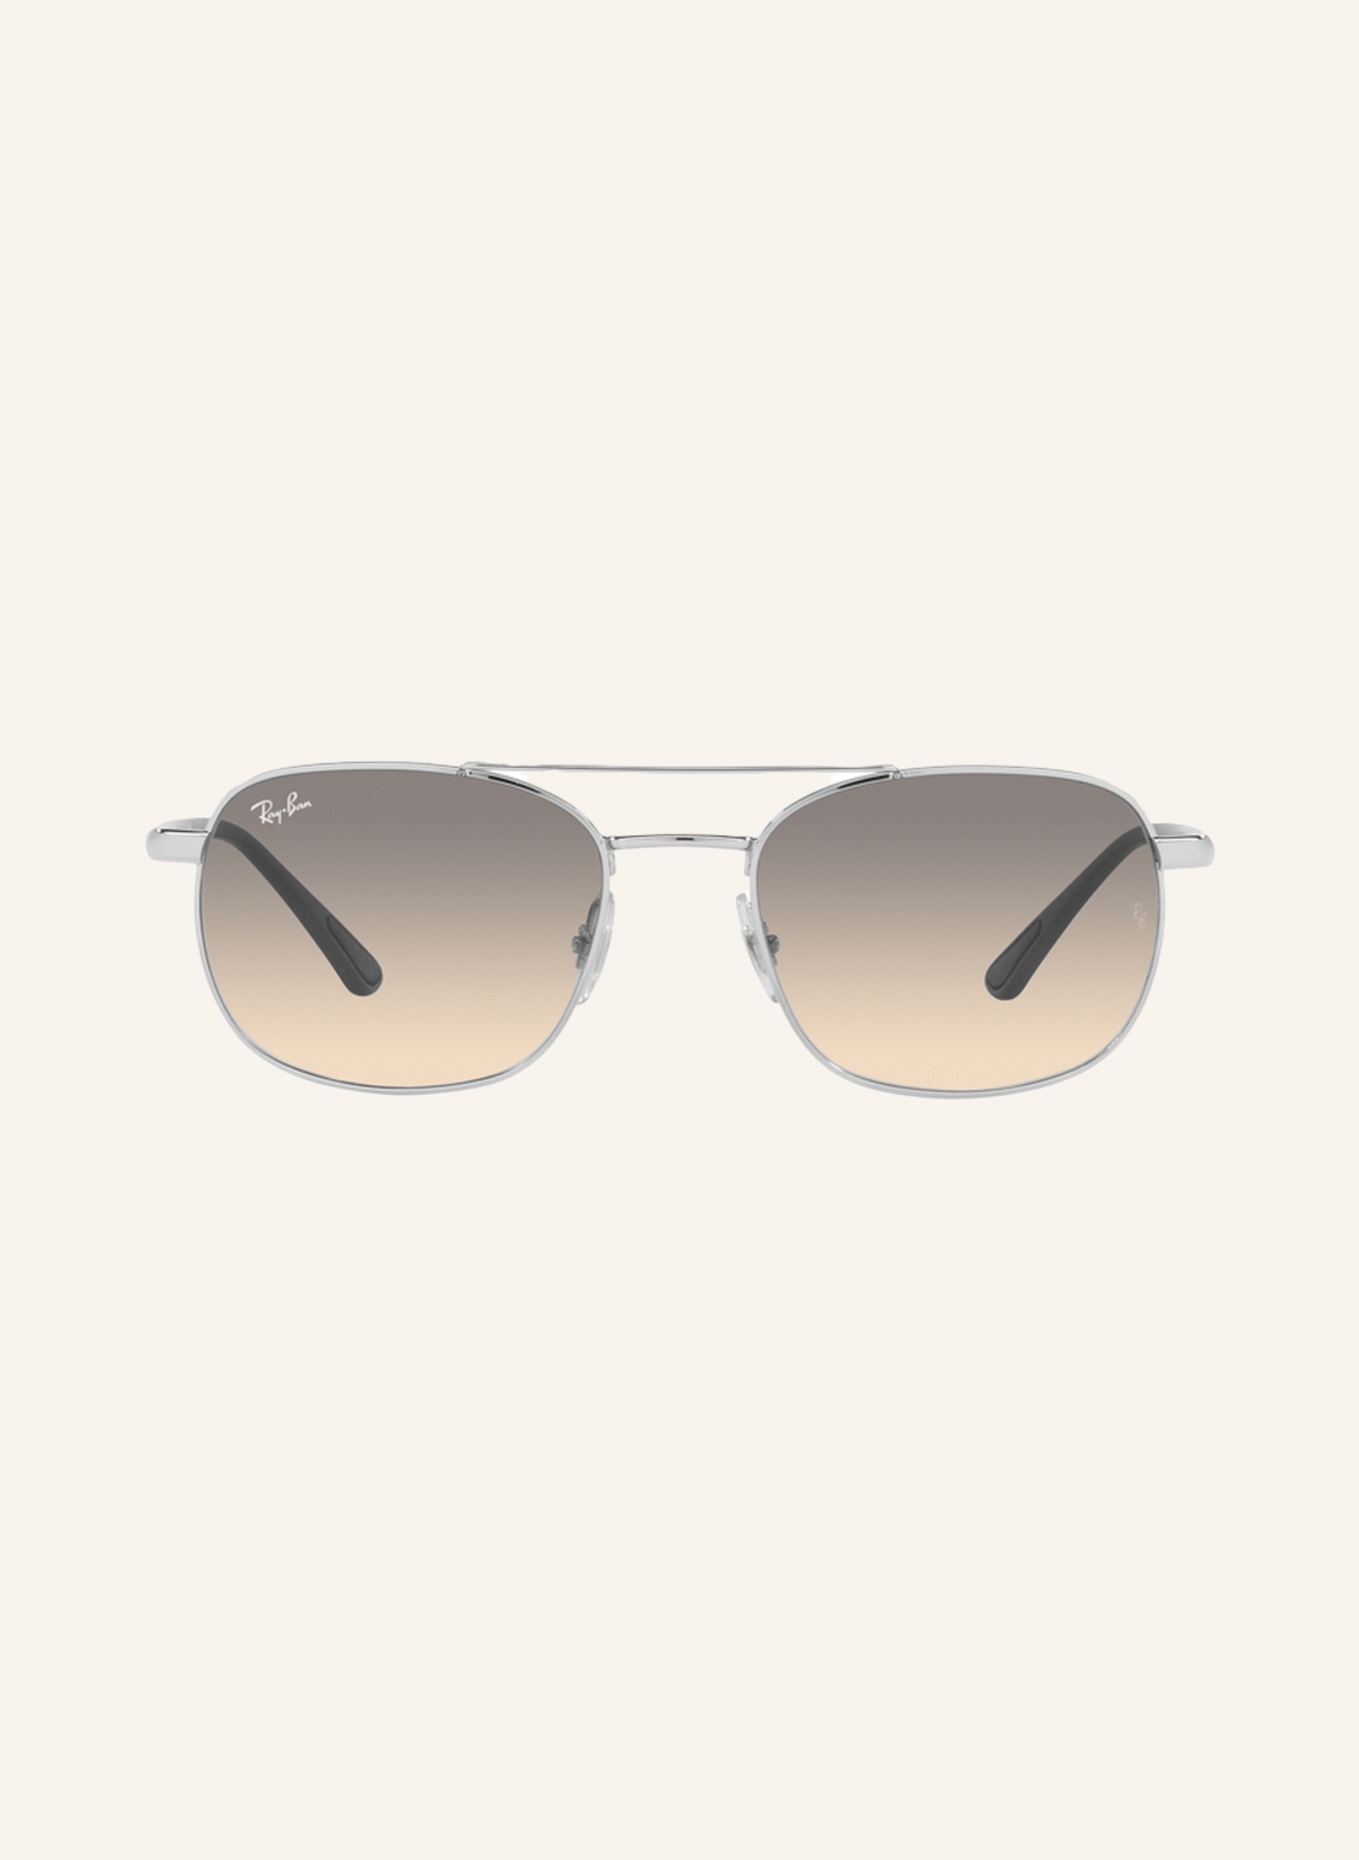 Ray-Ban Sunglasses RB3670, Color: 003/32 - SILVER/LIGHT GRAY GRADIENT (Image 2)